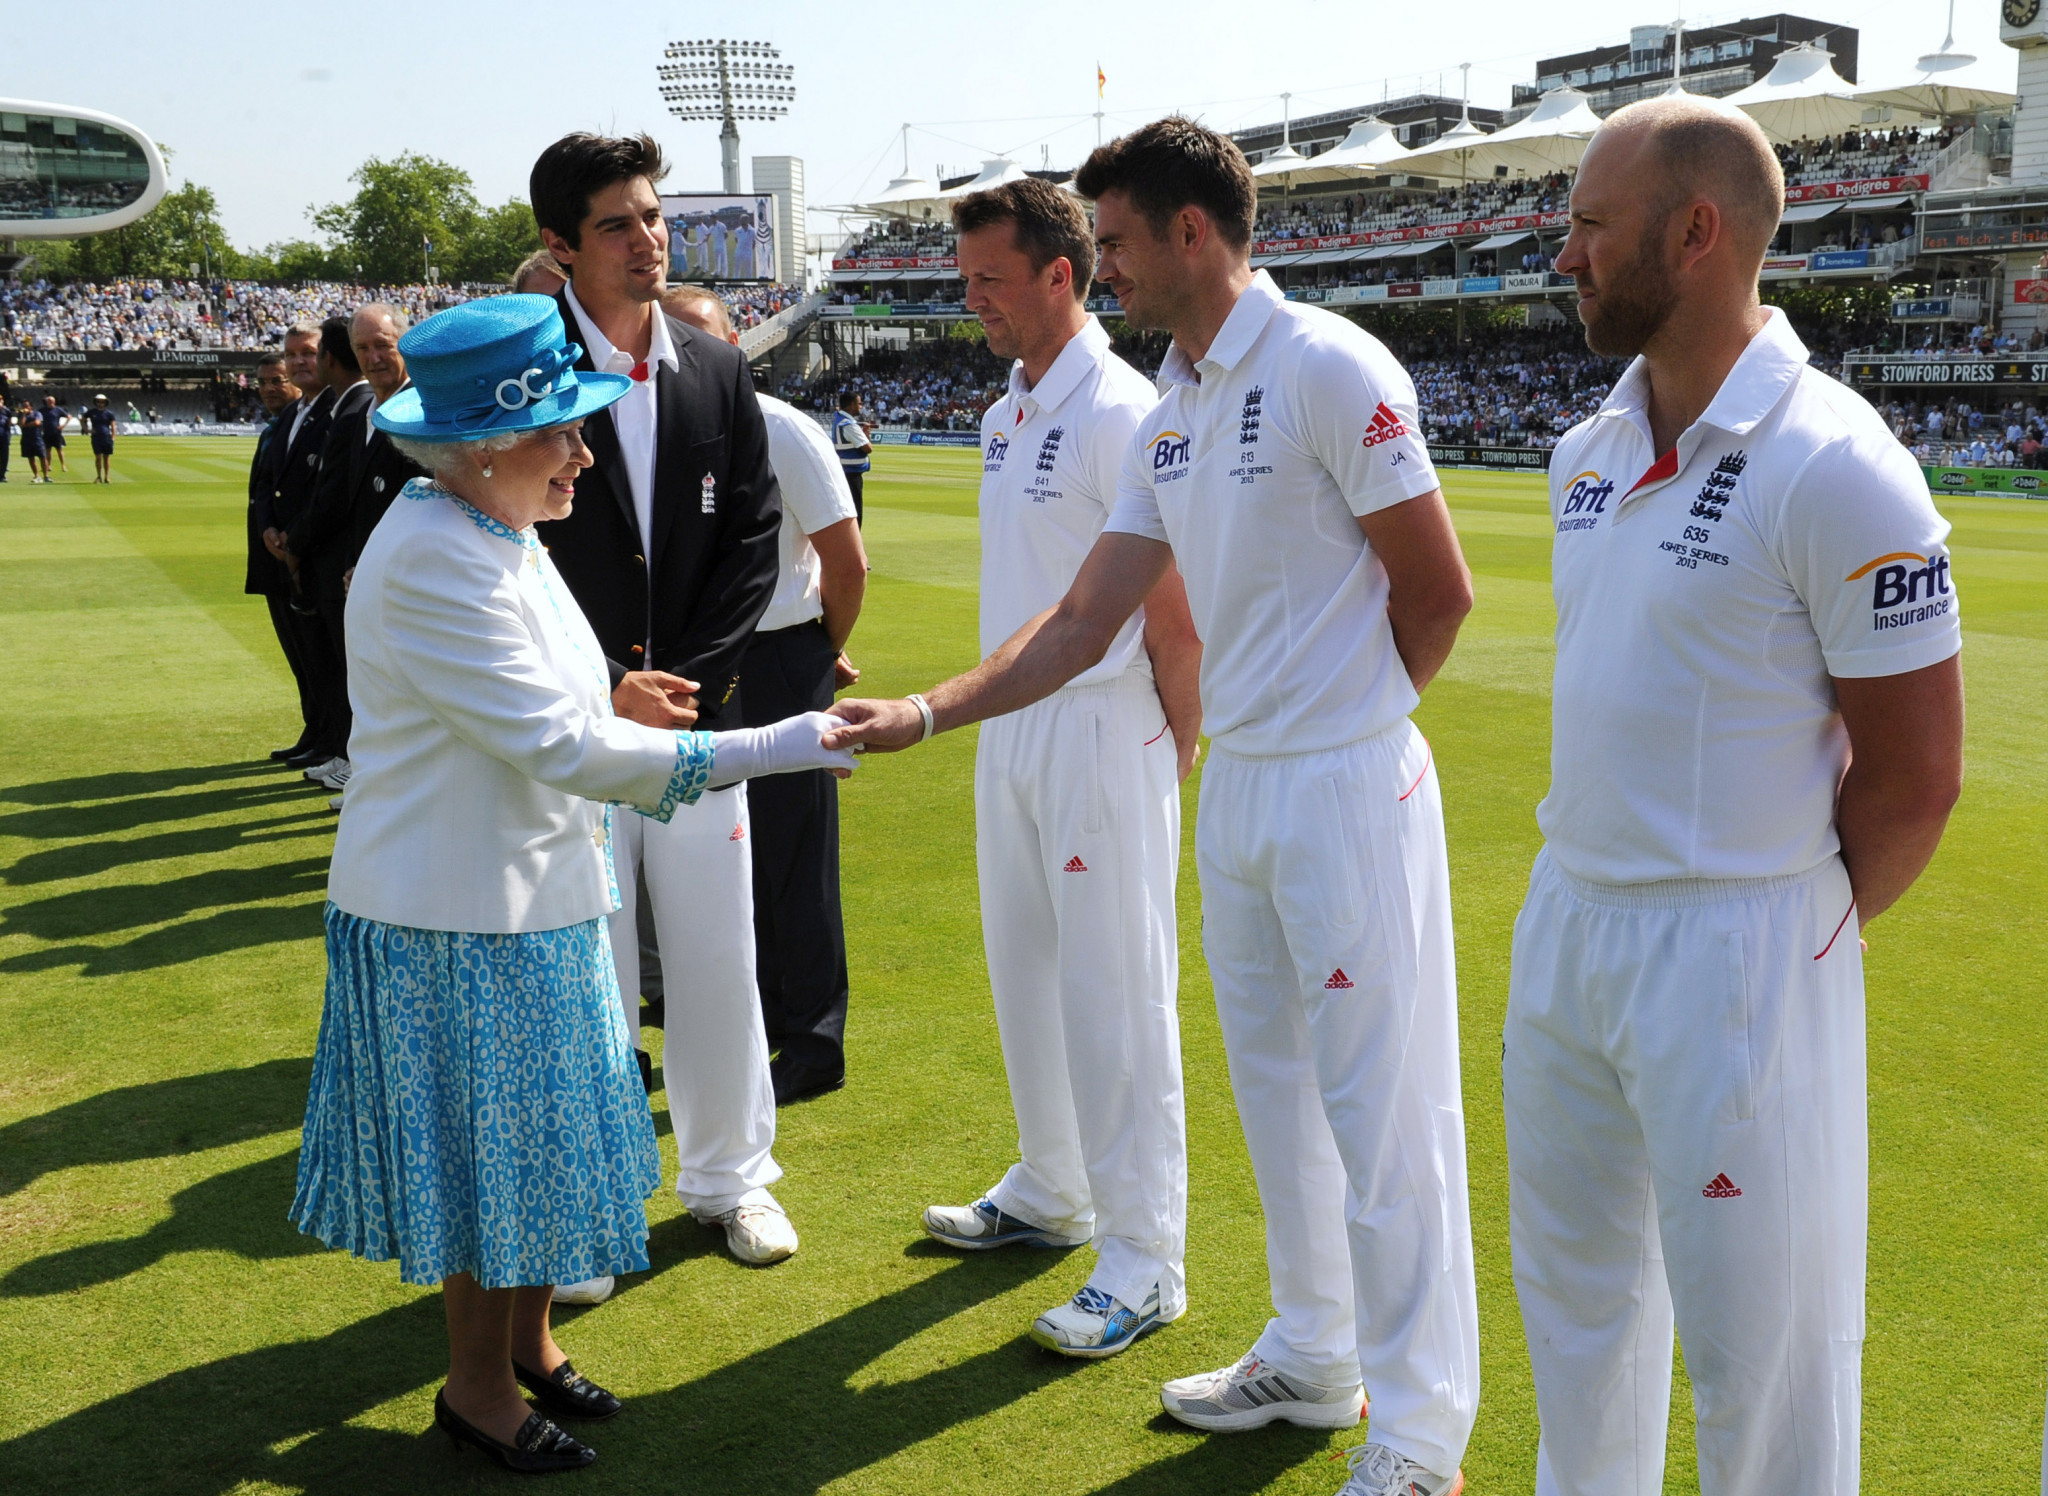 Queen Elizabeth II meets the England men's cricket team during the 2013 Ashes series ©Getty Images